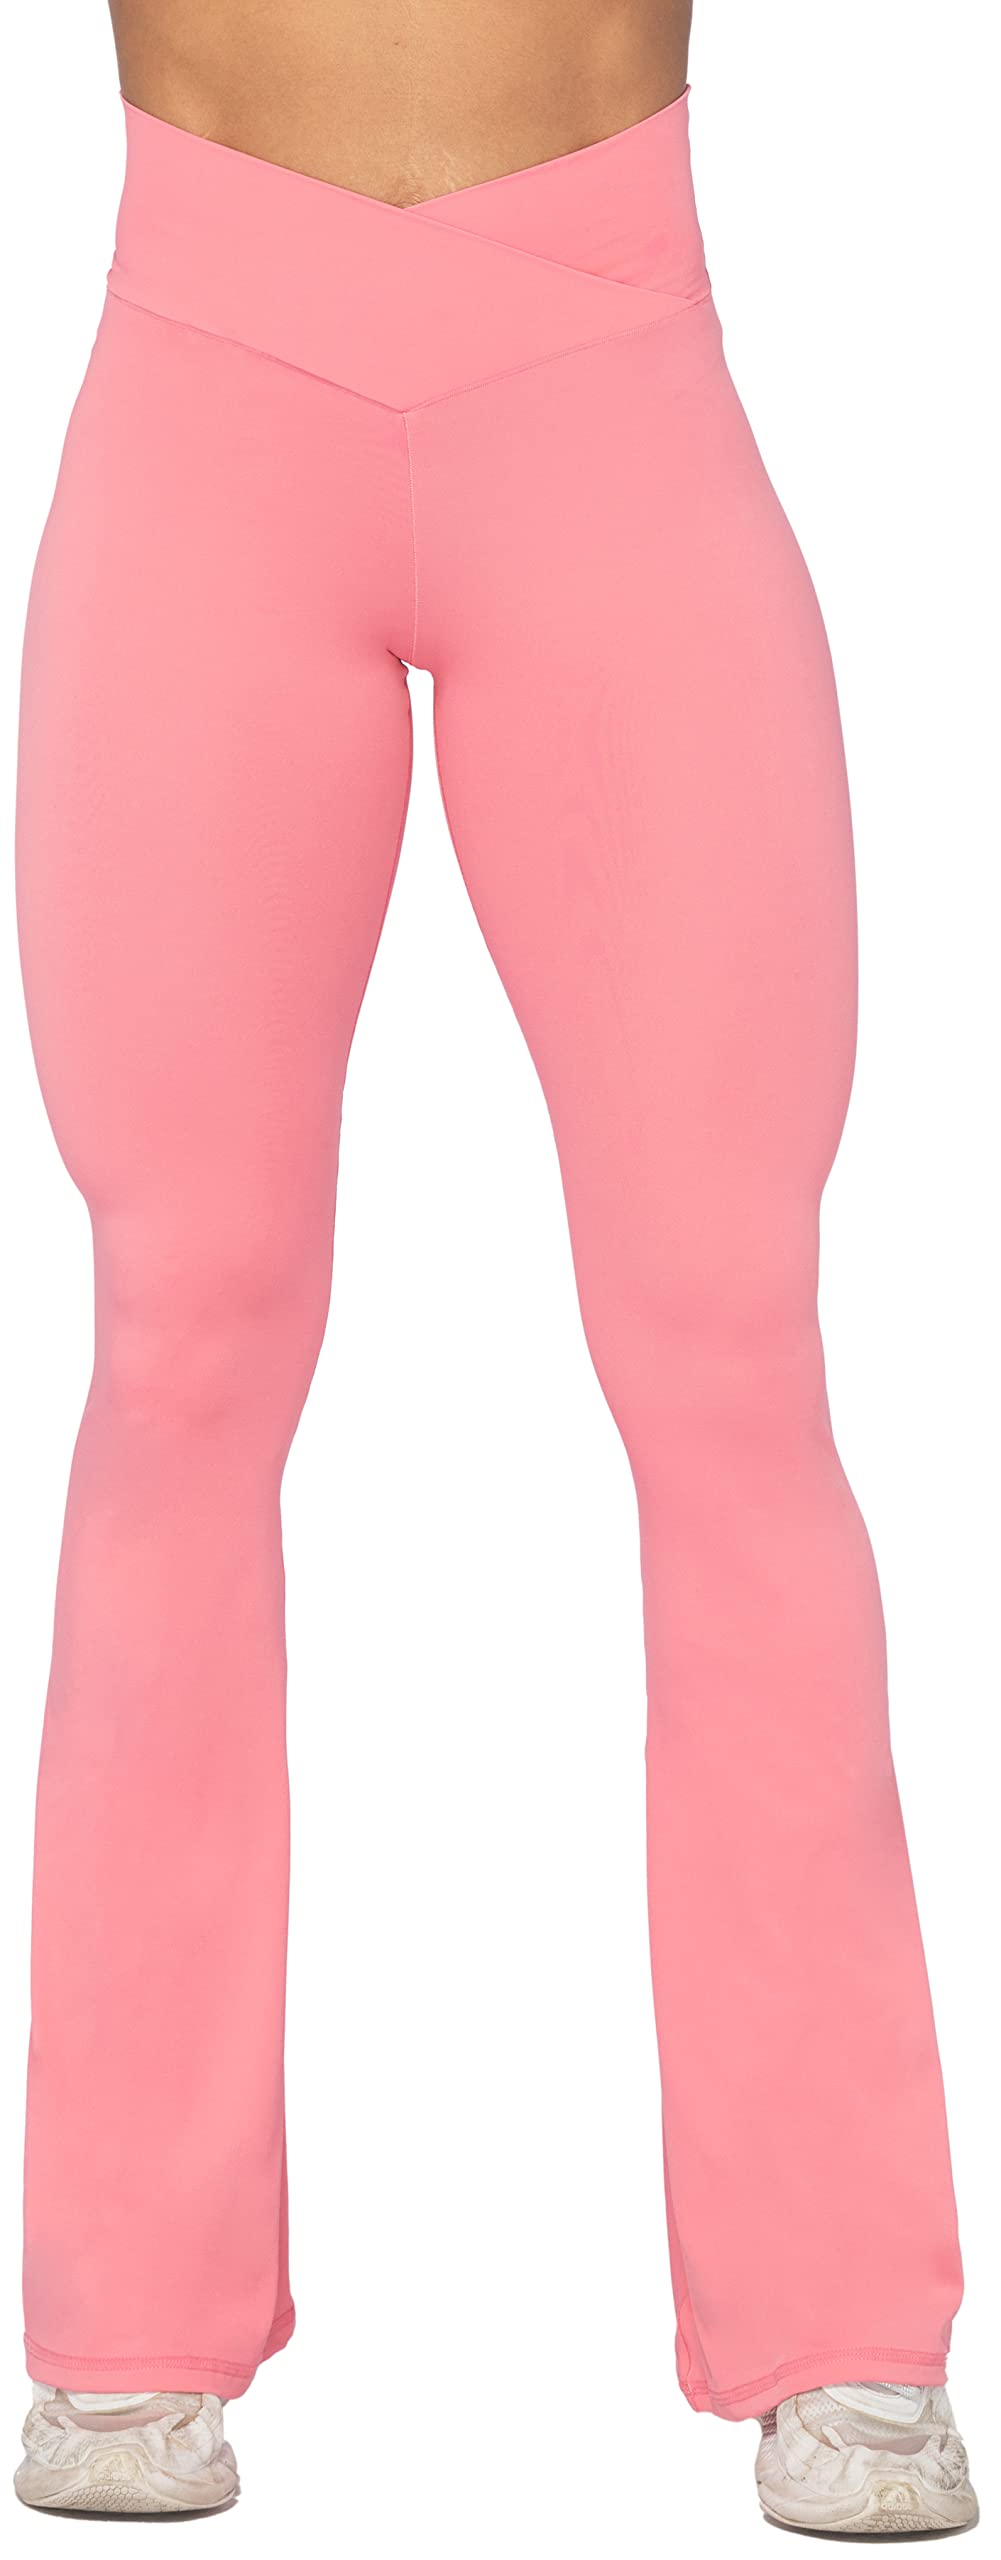 Buy Sunzel Flare Leggings, Crossover Yoga Pants with Tummy Control, High- Waisted and Wide Leg